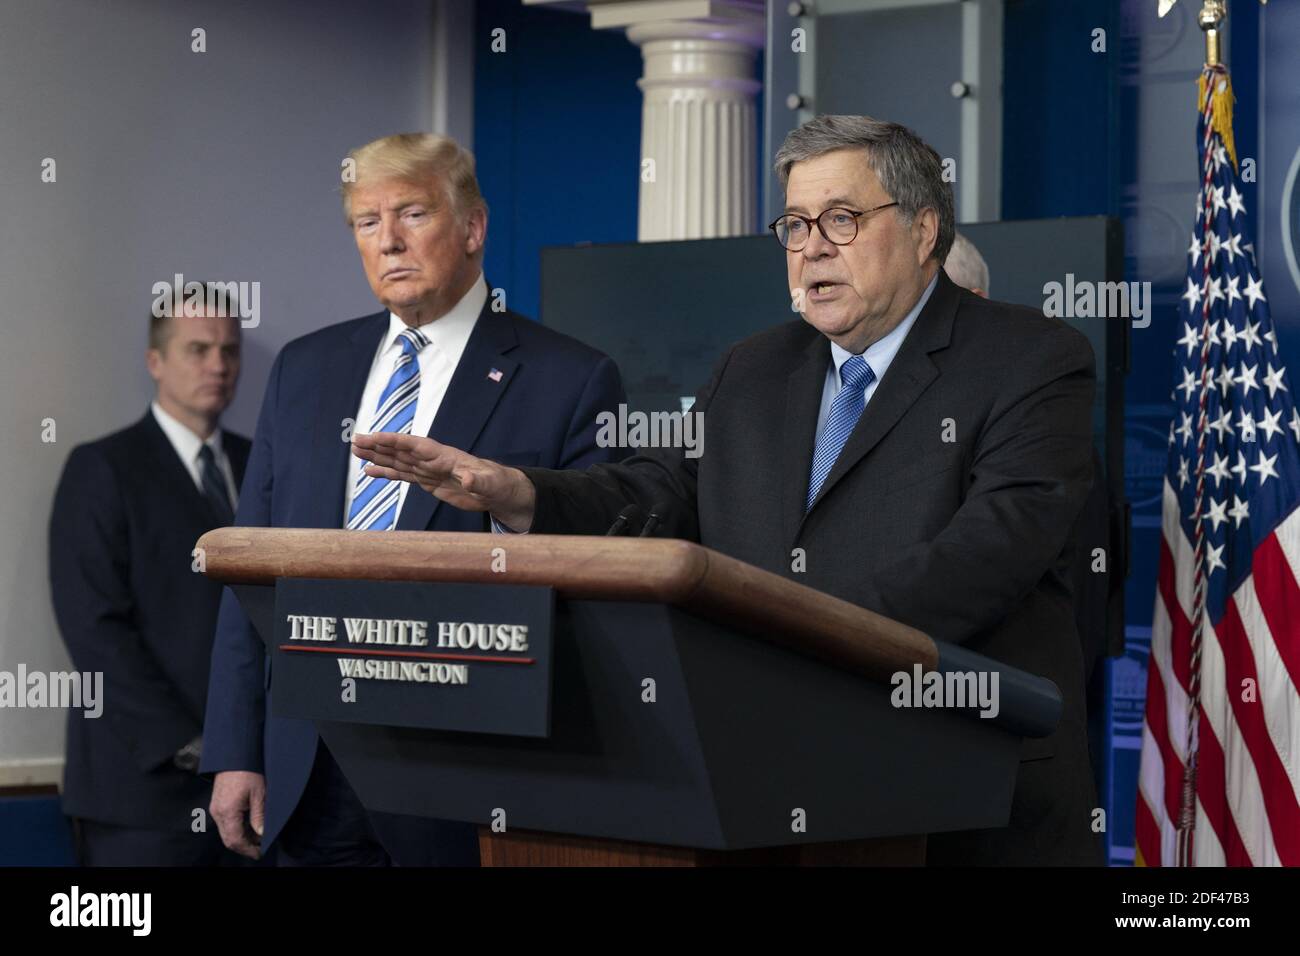 United States Attorney General William P. Barr speaks during a news briefing by members of the Coronavirus Task Force at the White House on March 23, 2020 in Washington, DC, USA. Photo by Chris Kleponis/Pool/ABACAPRESS.COM Stock Photo